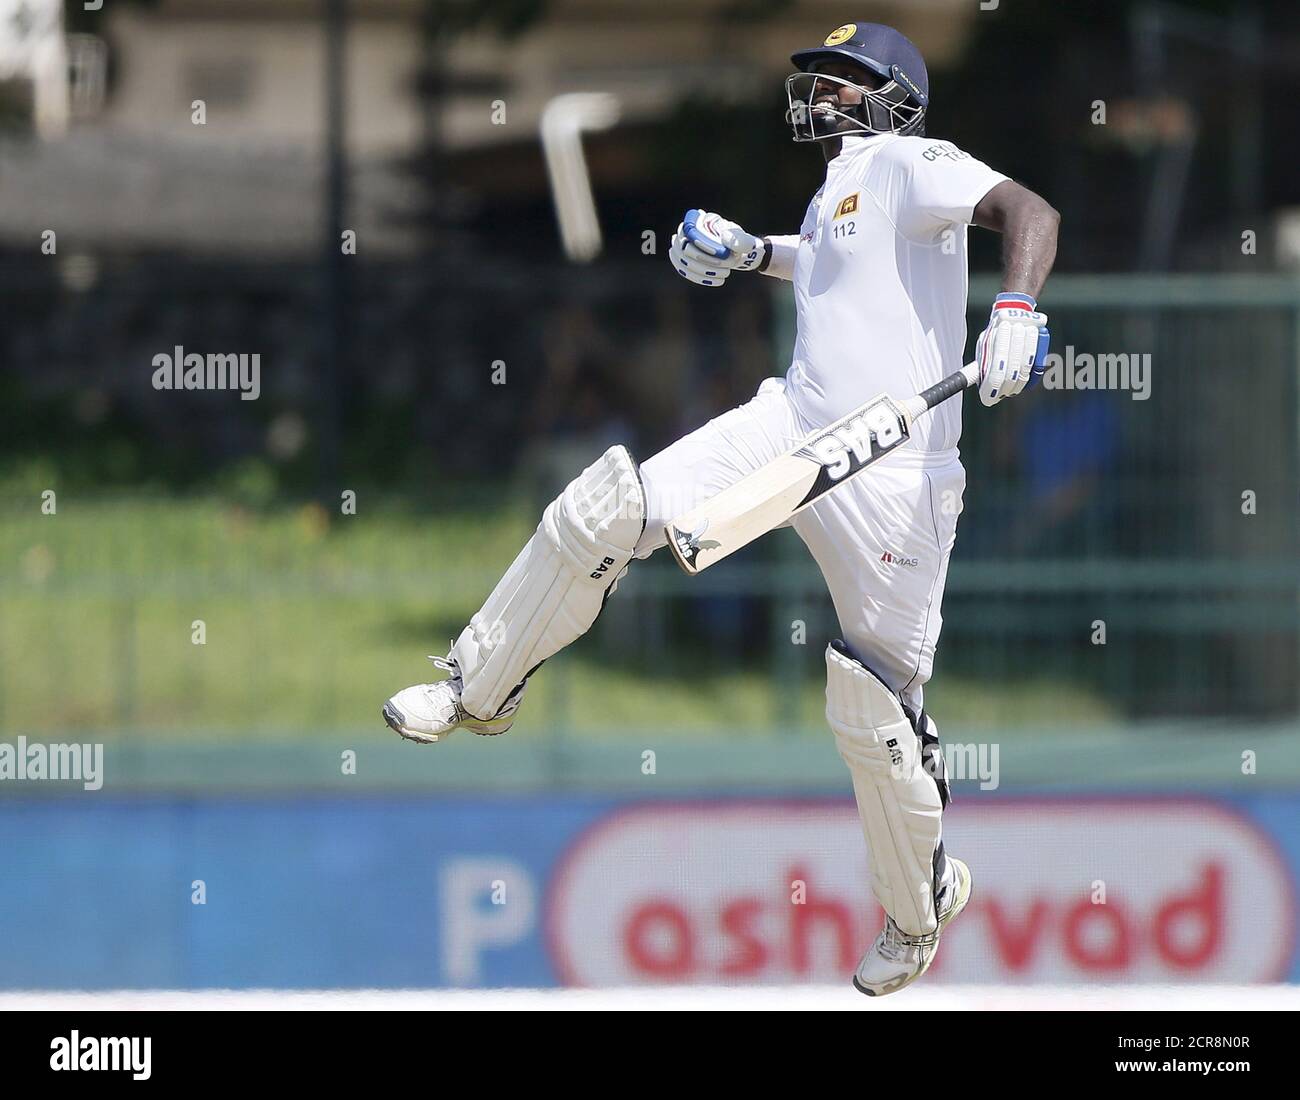 Sri Lanka's captain Angelo Mathews celebrates his century during the final day of their third and final test cricket match against India in Colombo, September 1, 2015. REUTERS/Dinuka Liyanawatte Stock Photo